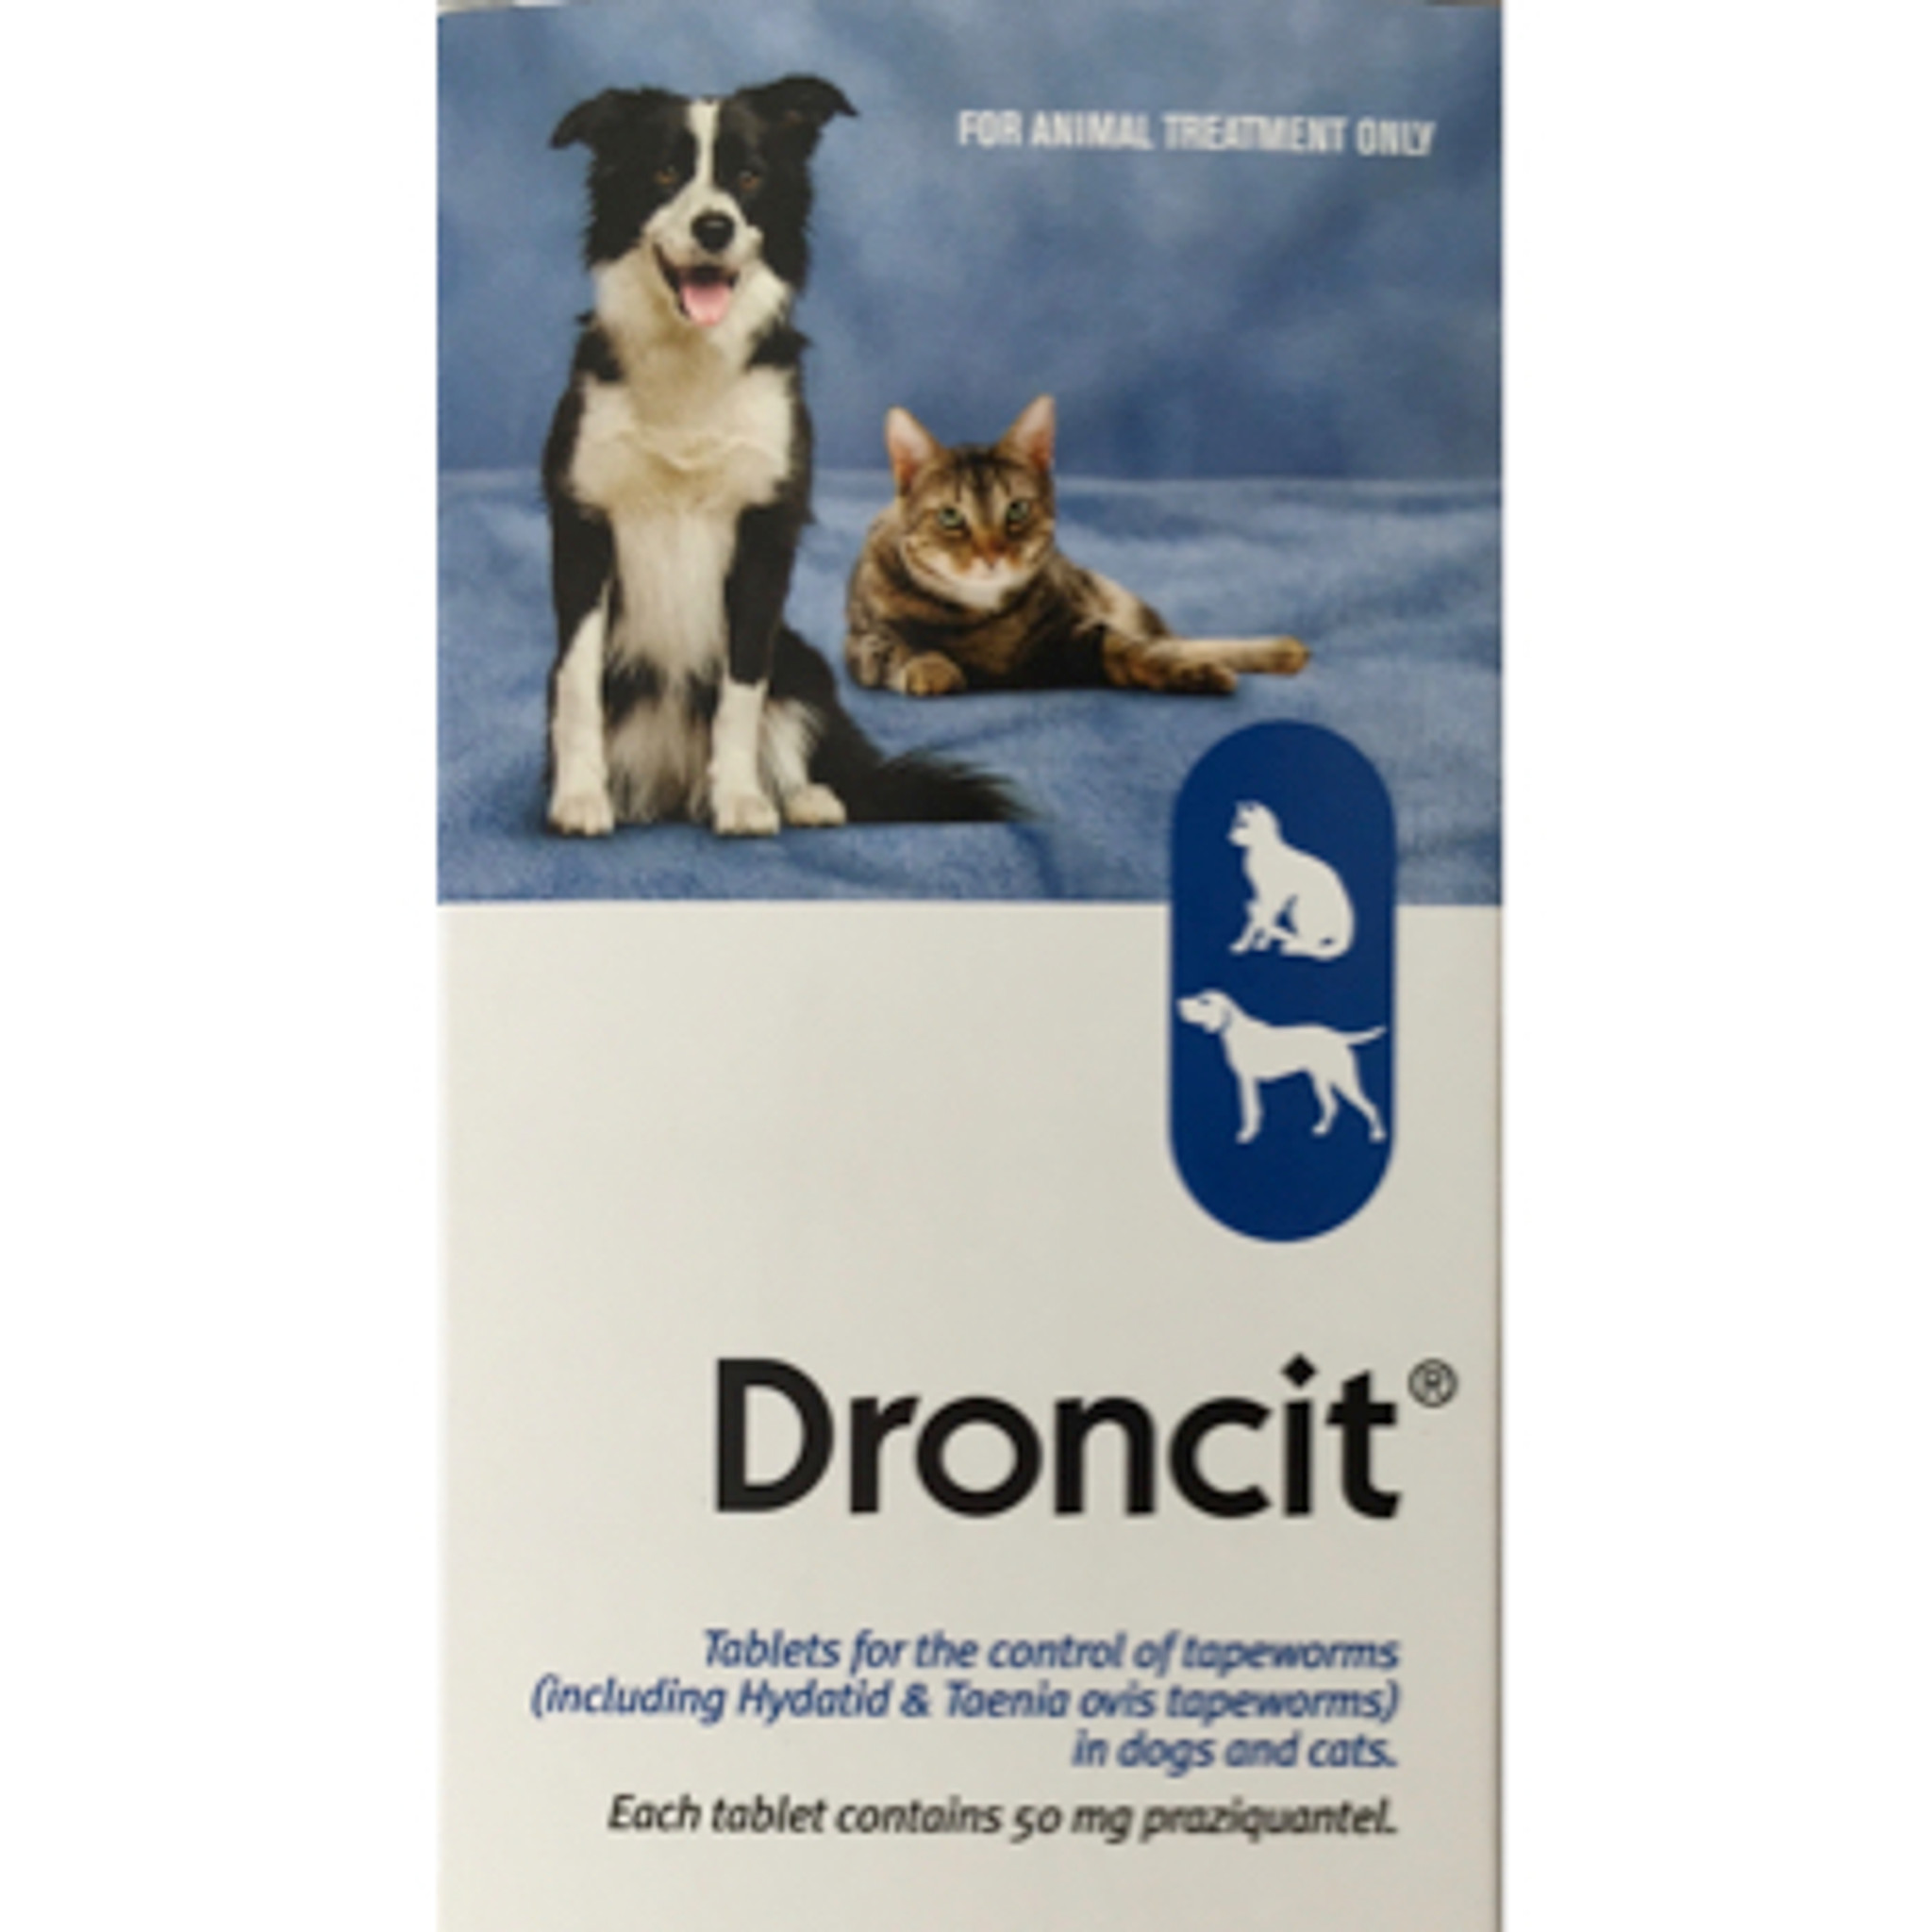 Droncit Spot On Vermifuges Chat 4 Tubes Traitement Chats Pipettes 0 5ml 20mg Fr Veterinari Pipette Animali